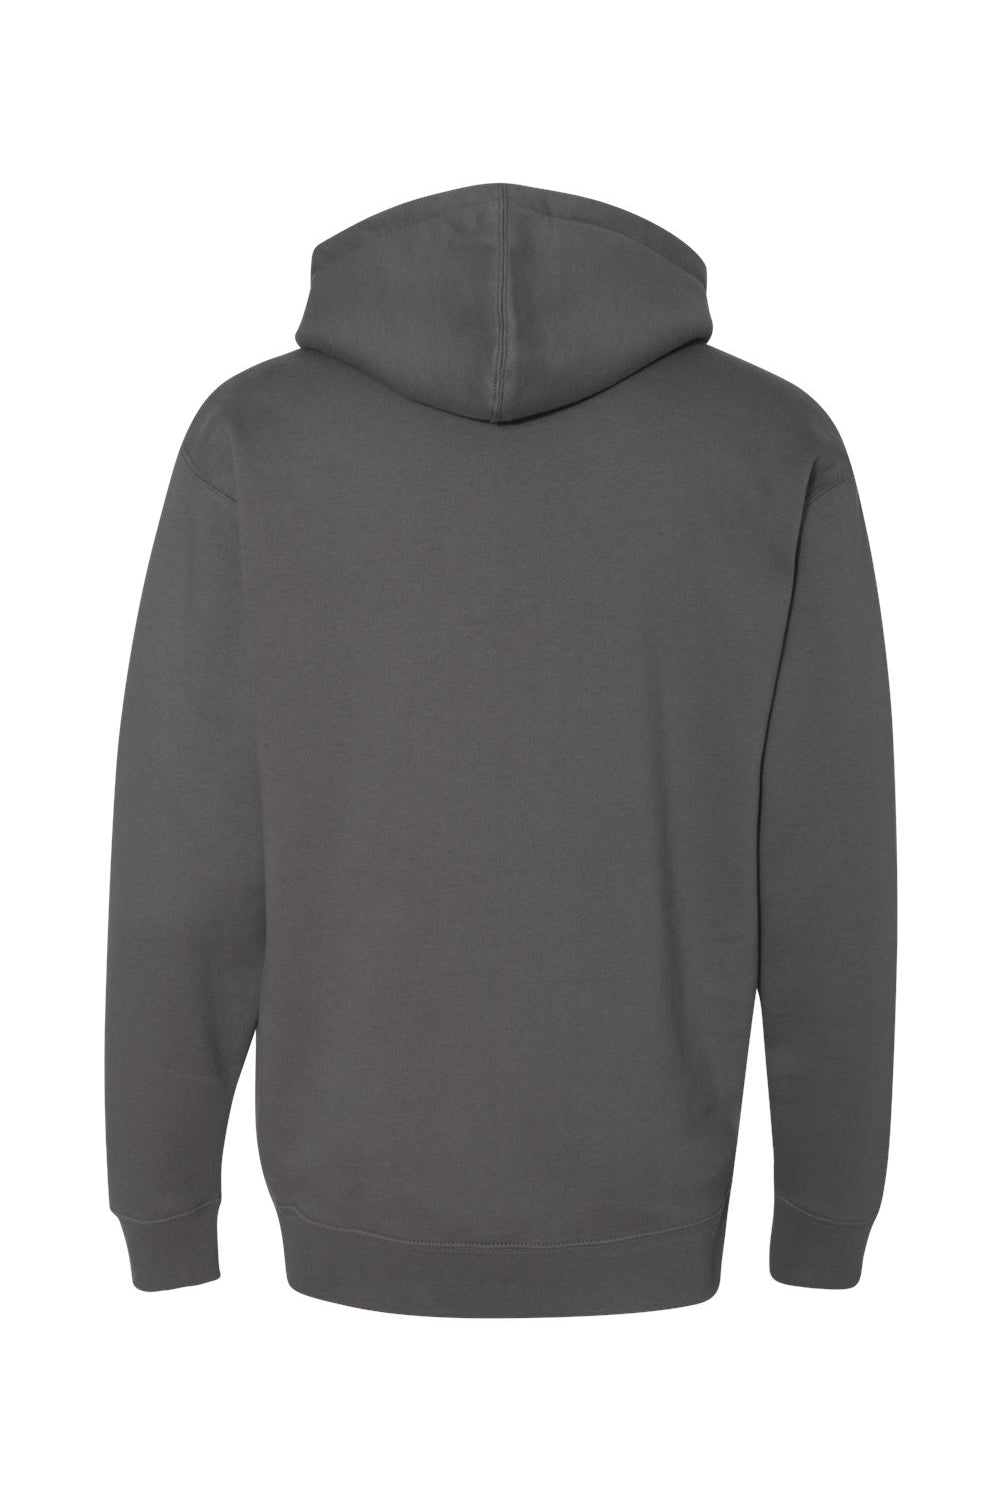 Independent Trading Co. IND4000 Mens Hooded Sweatshirt Hoodie Charcoal Grey Flat Back